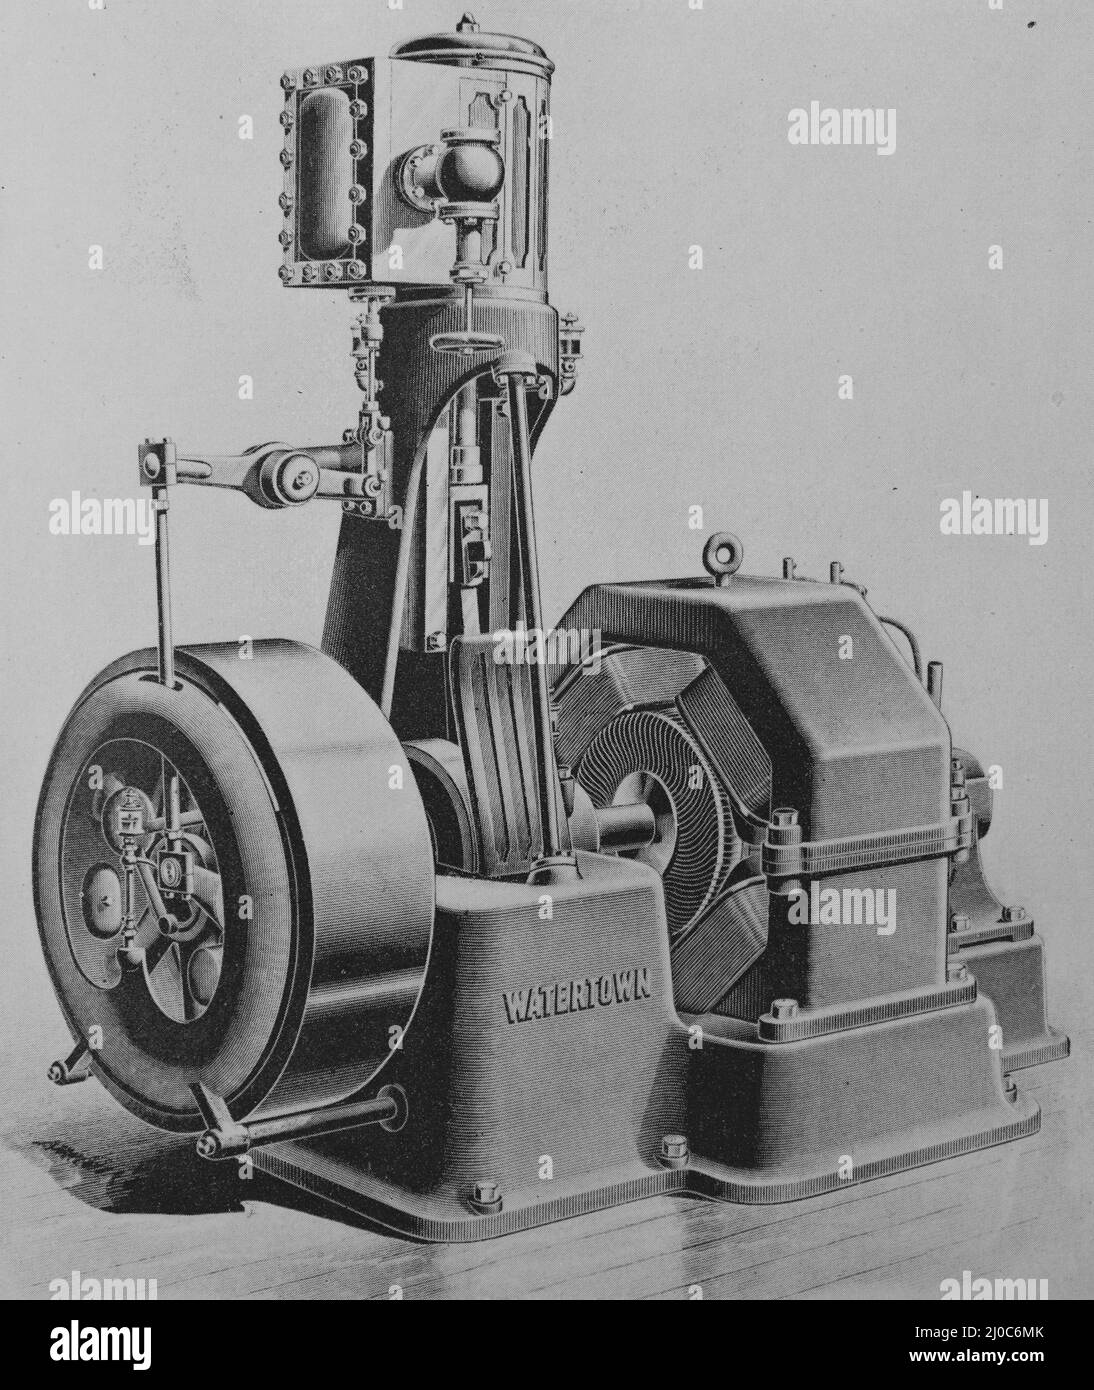 Direct-connected engine built by the Watertown Steam Engine Company, Watertown New York. Black and White Illustration; Stock Photo